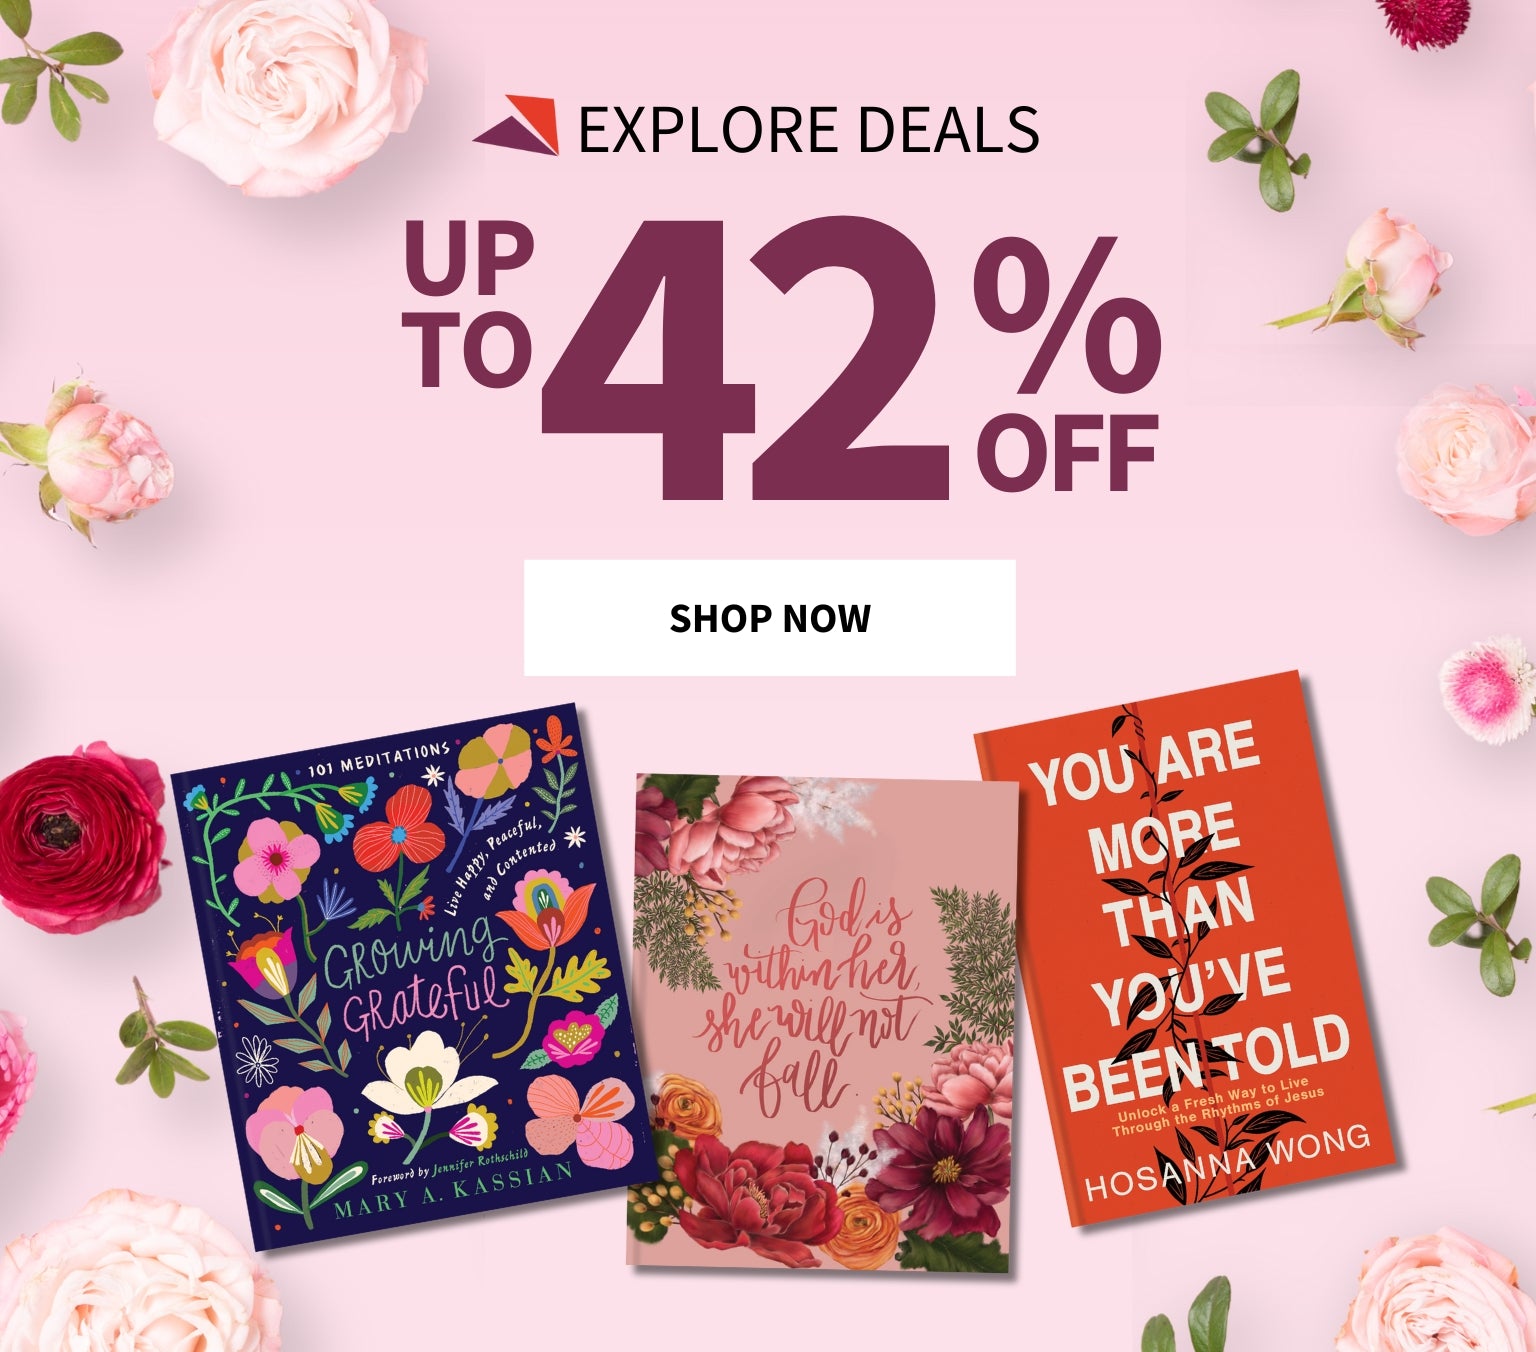 Spring Renewal Explore Deals Up To 42% Off